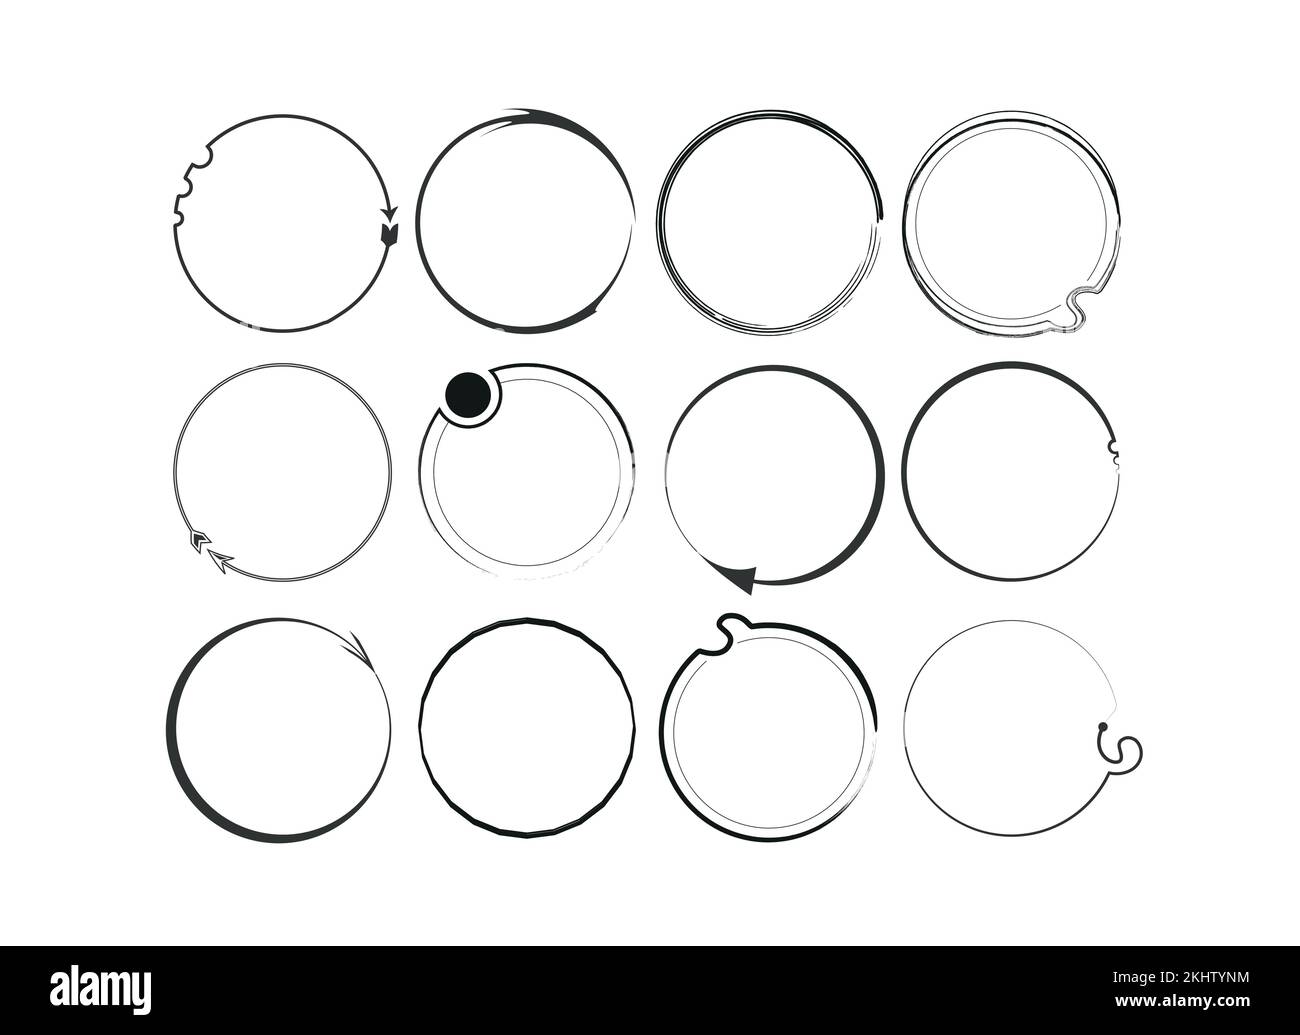 Eleven abstract hand-drawn circle frames with different details Stock Vector